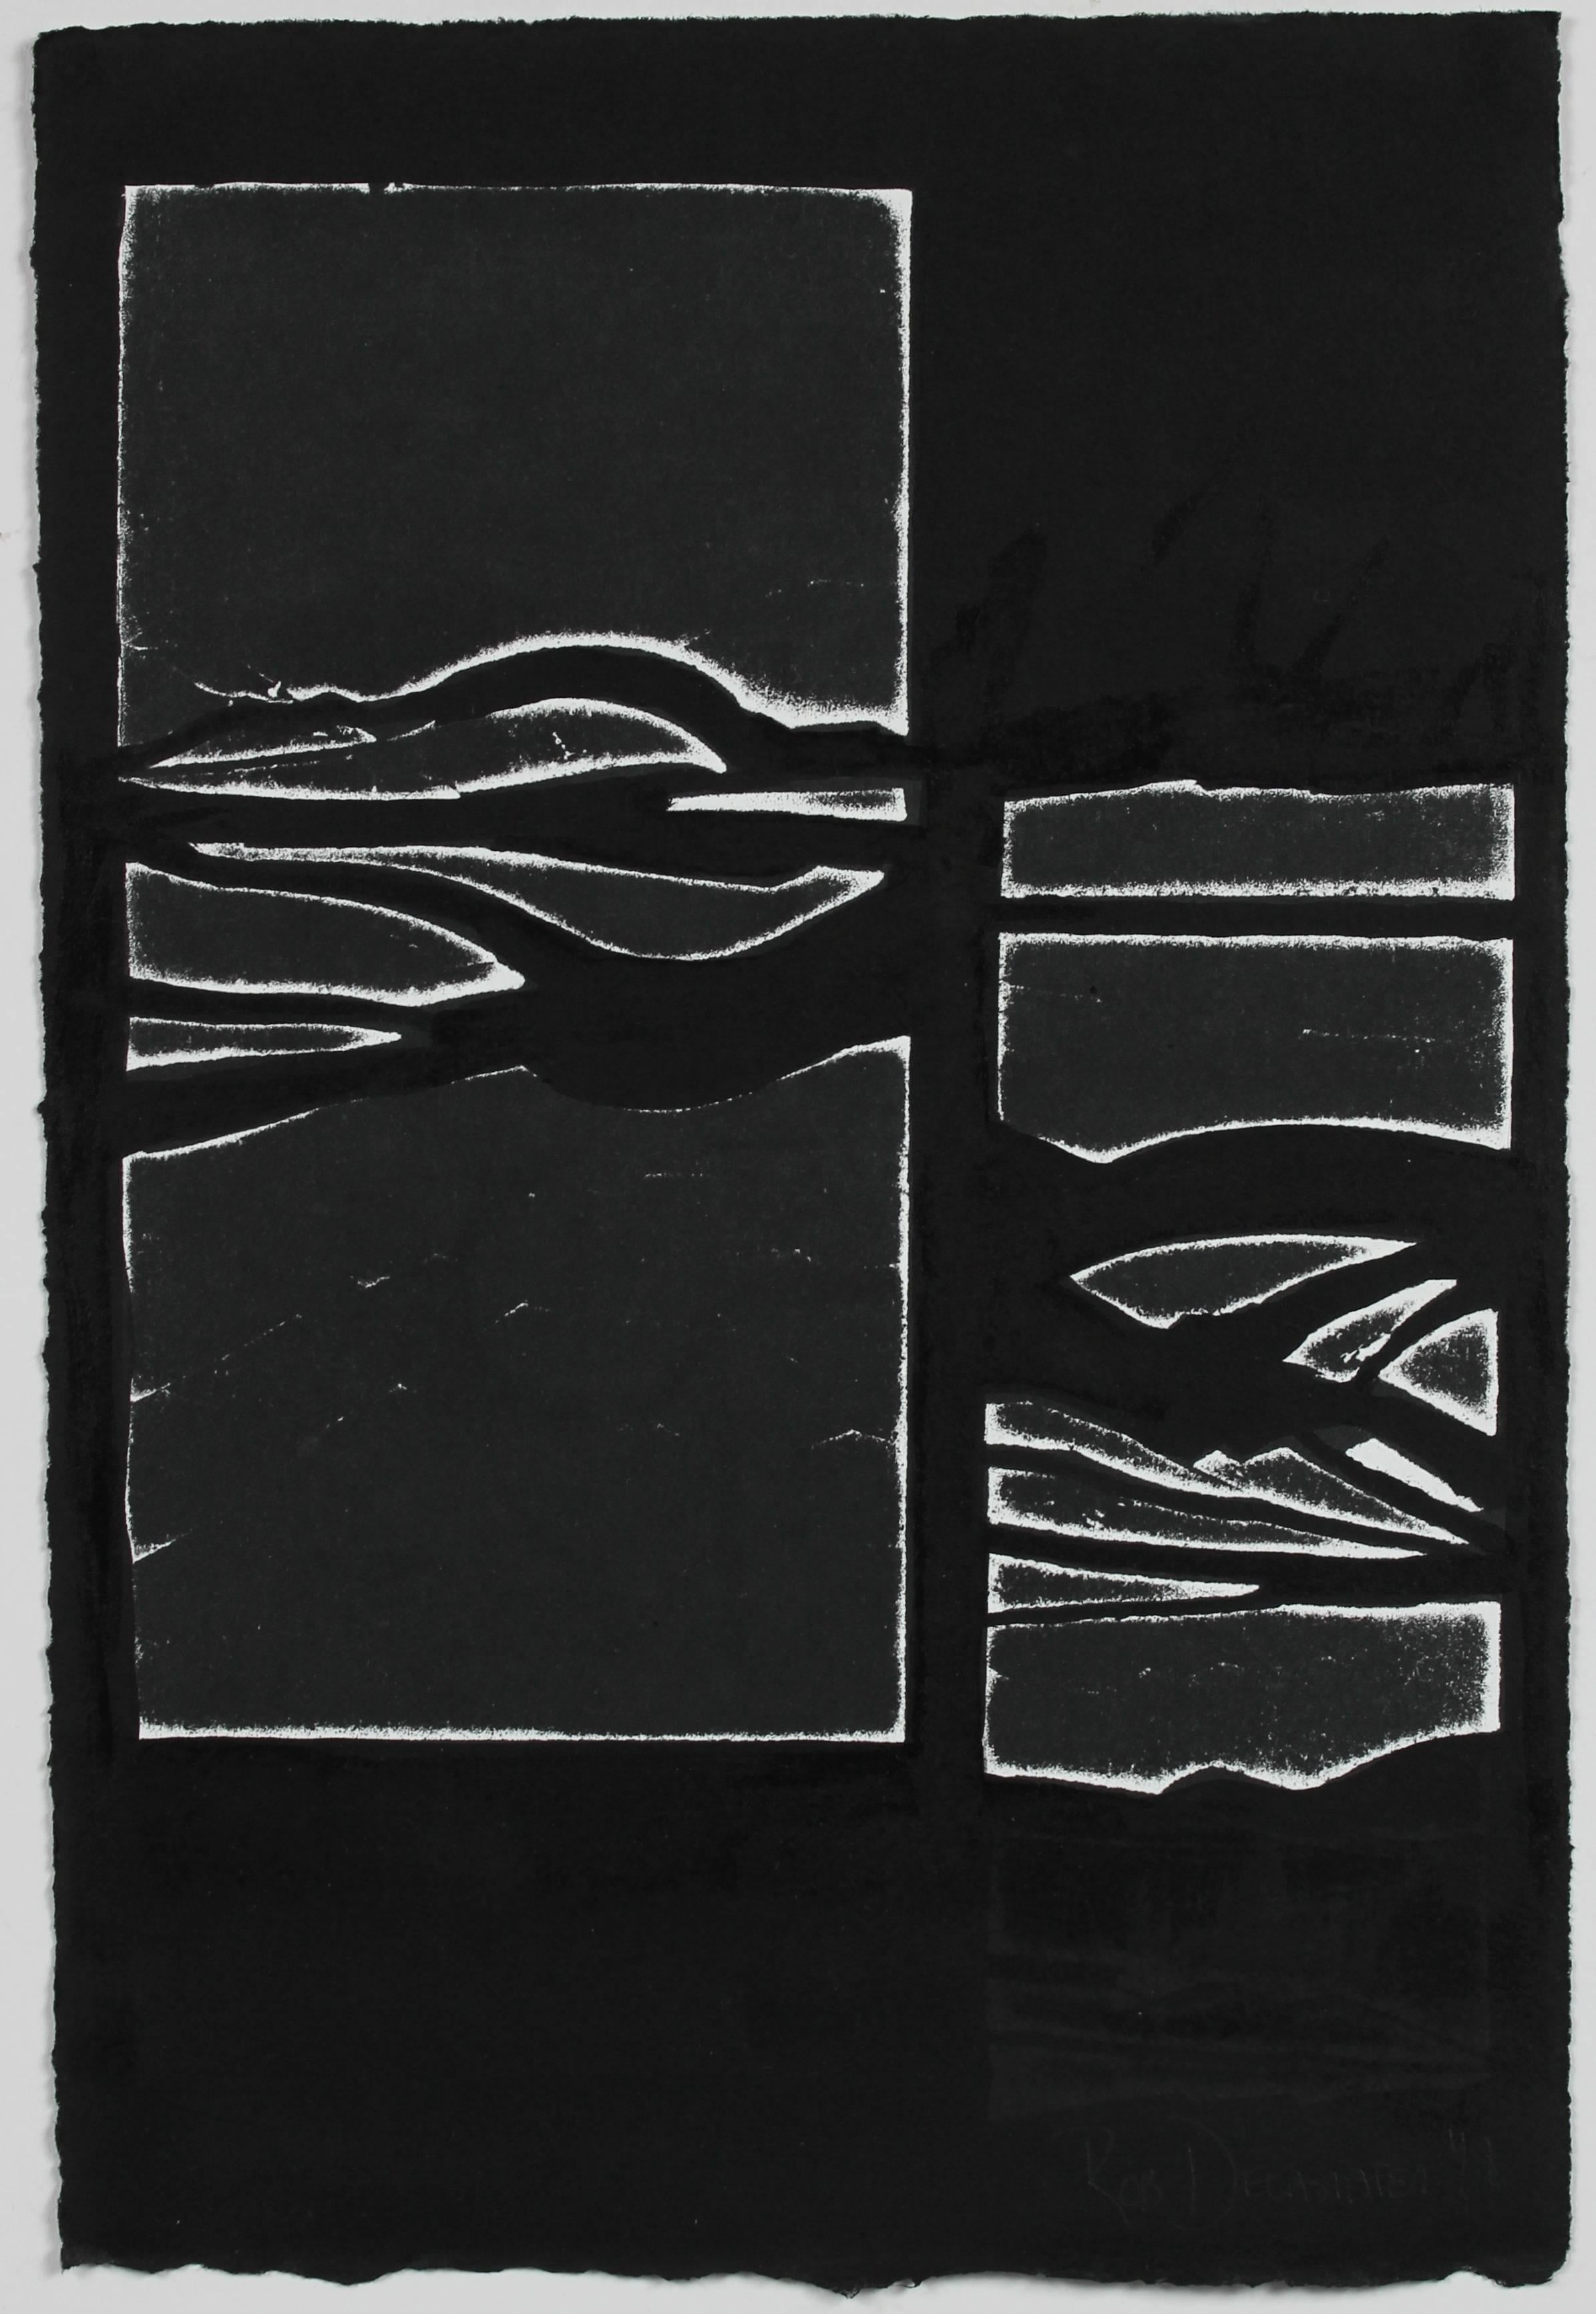 Rob Delamater Abstract Print - "Composite Landscape III" Monochromatic Abstract Monotype, 2018